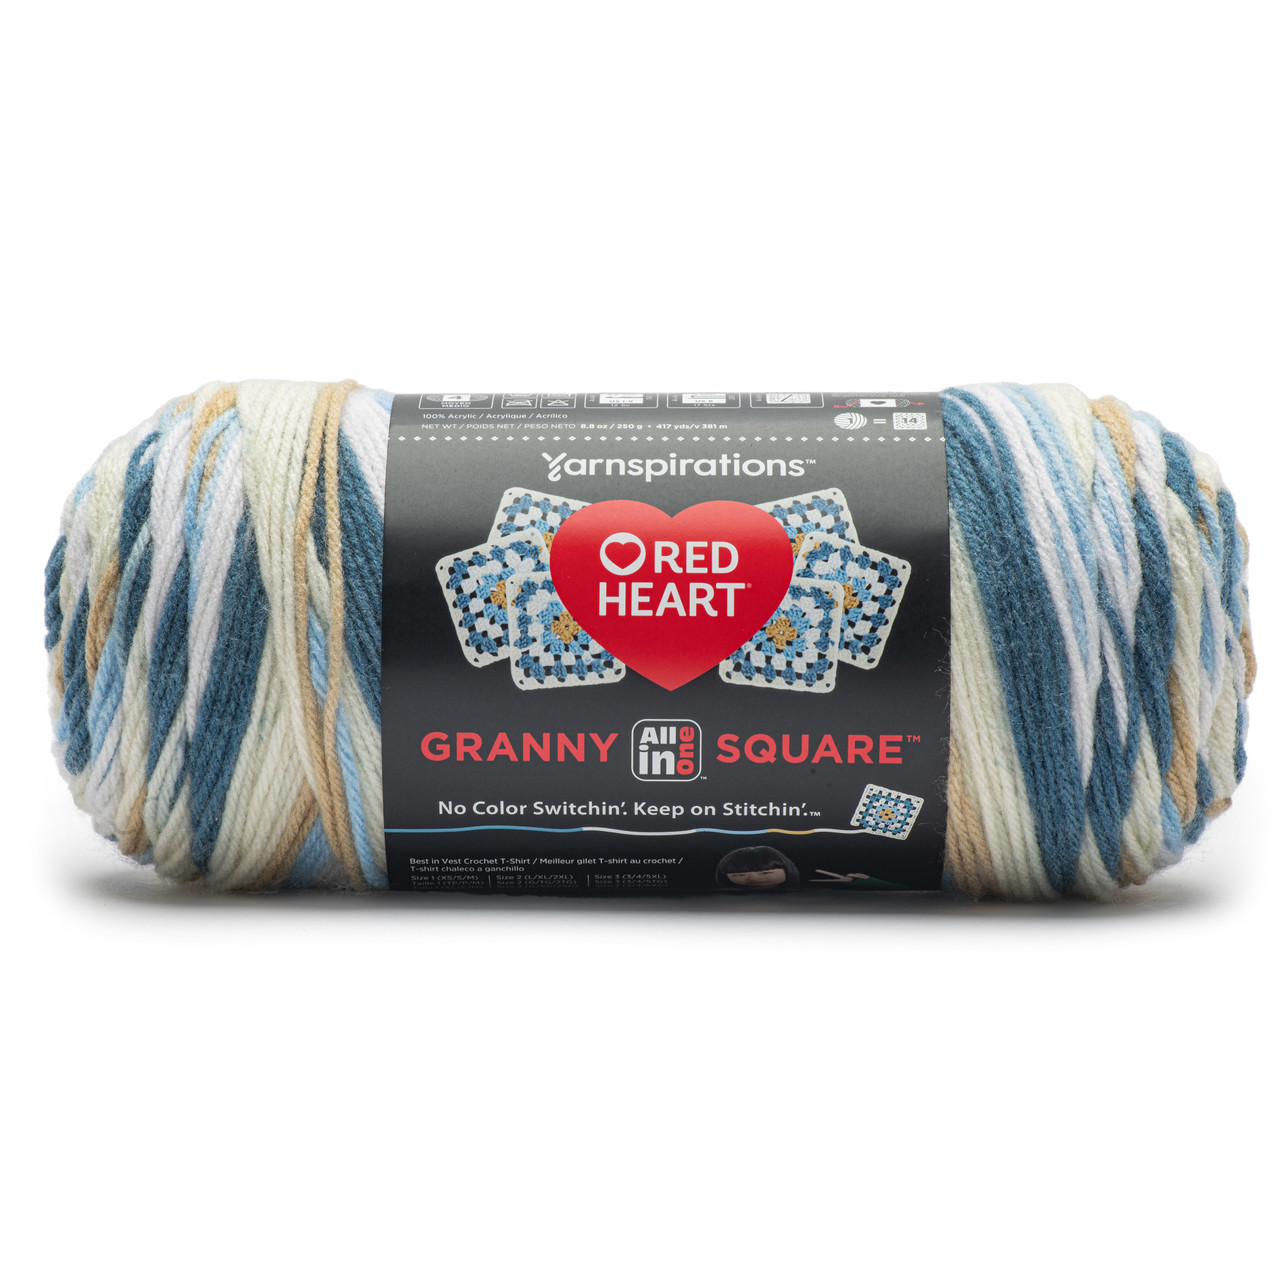 Red Heart All In One Granny Square Yarn (250g/8.8oz), Yarnspirations